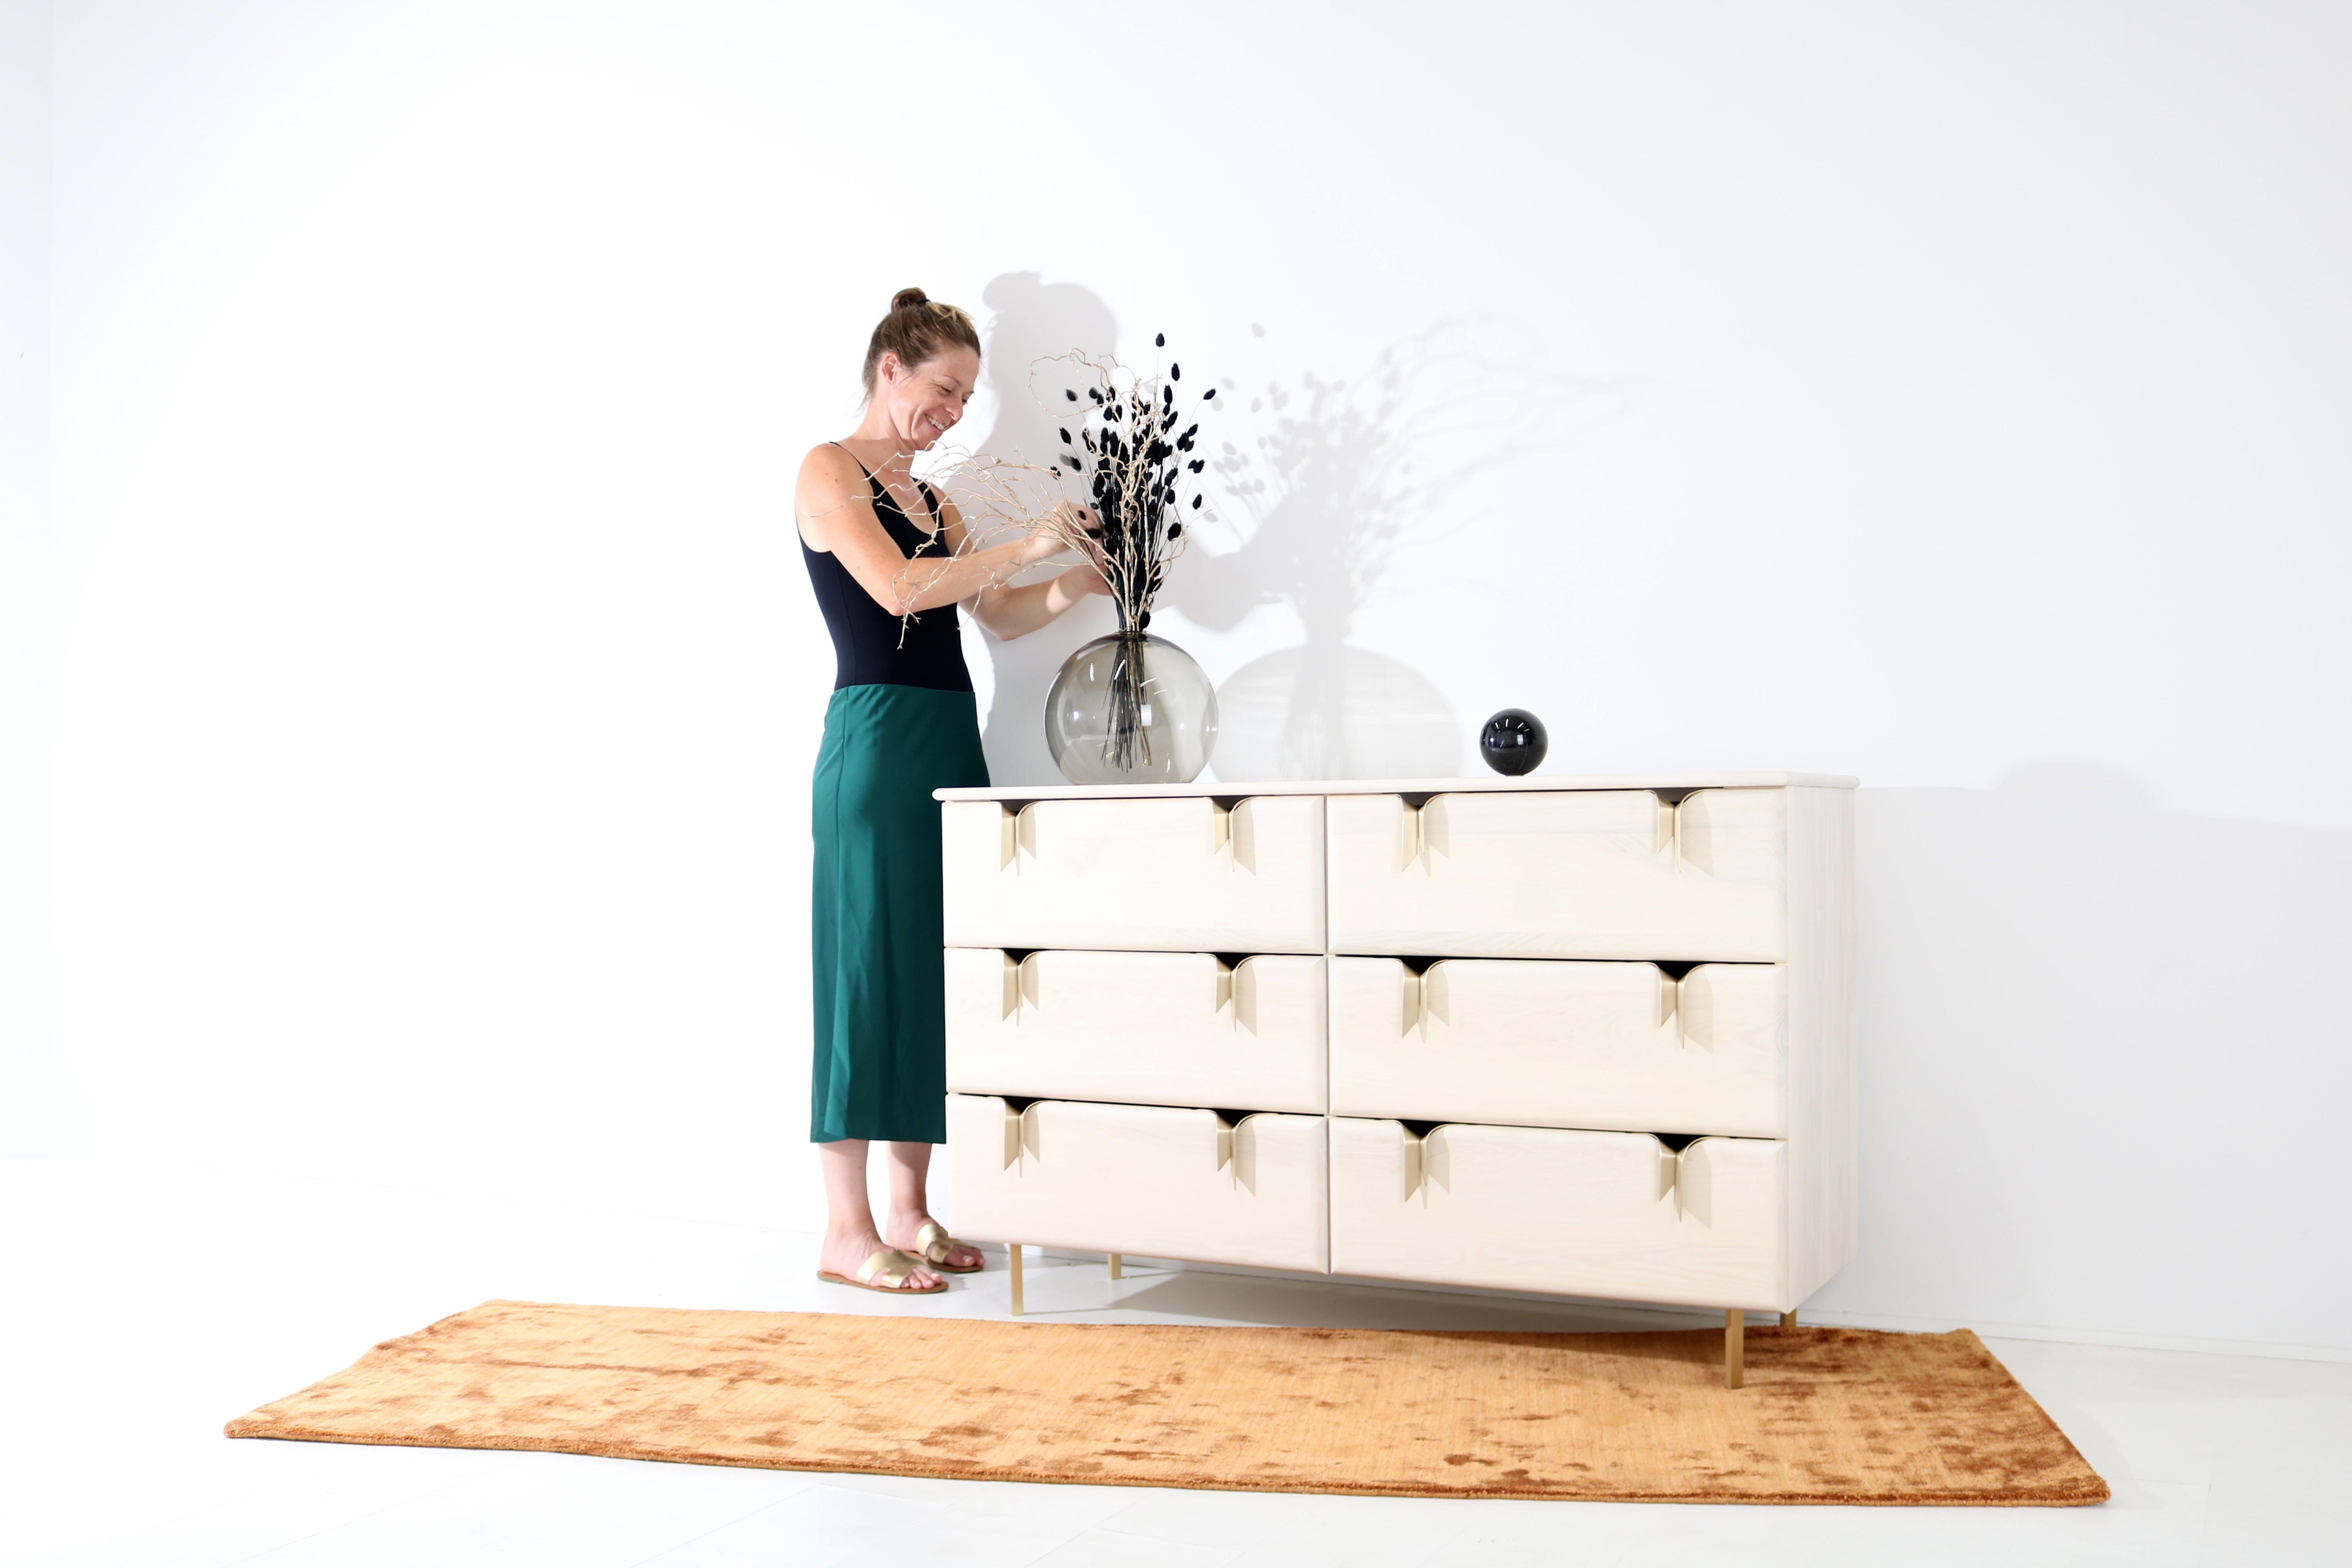 An interest in the translation of textile languages and soft surfaces through furniture forms has led to the development of a unique hardware and storage collection. Inspired by ribbons and communicated through hand cast metal hardware and solid